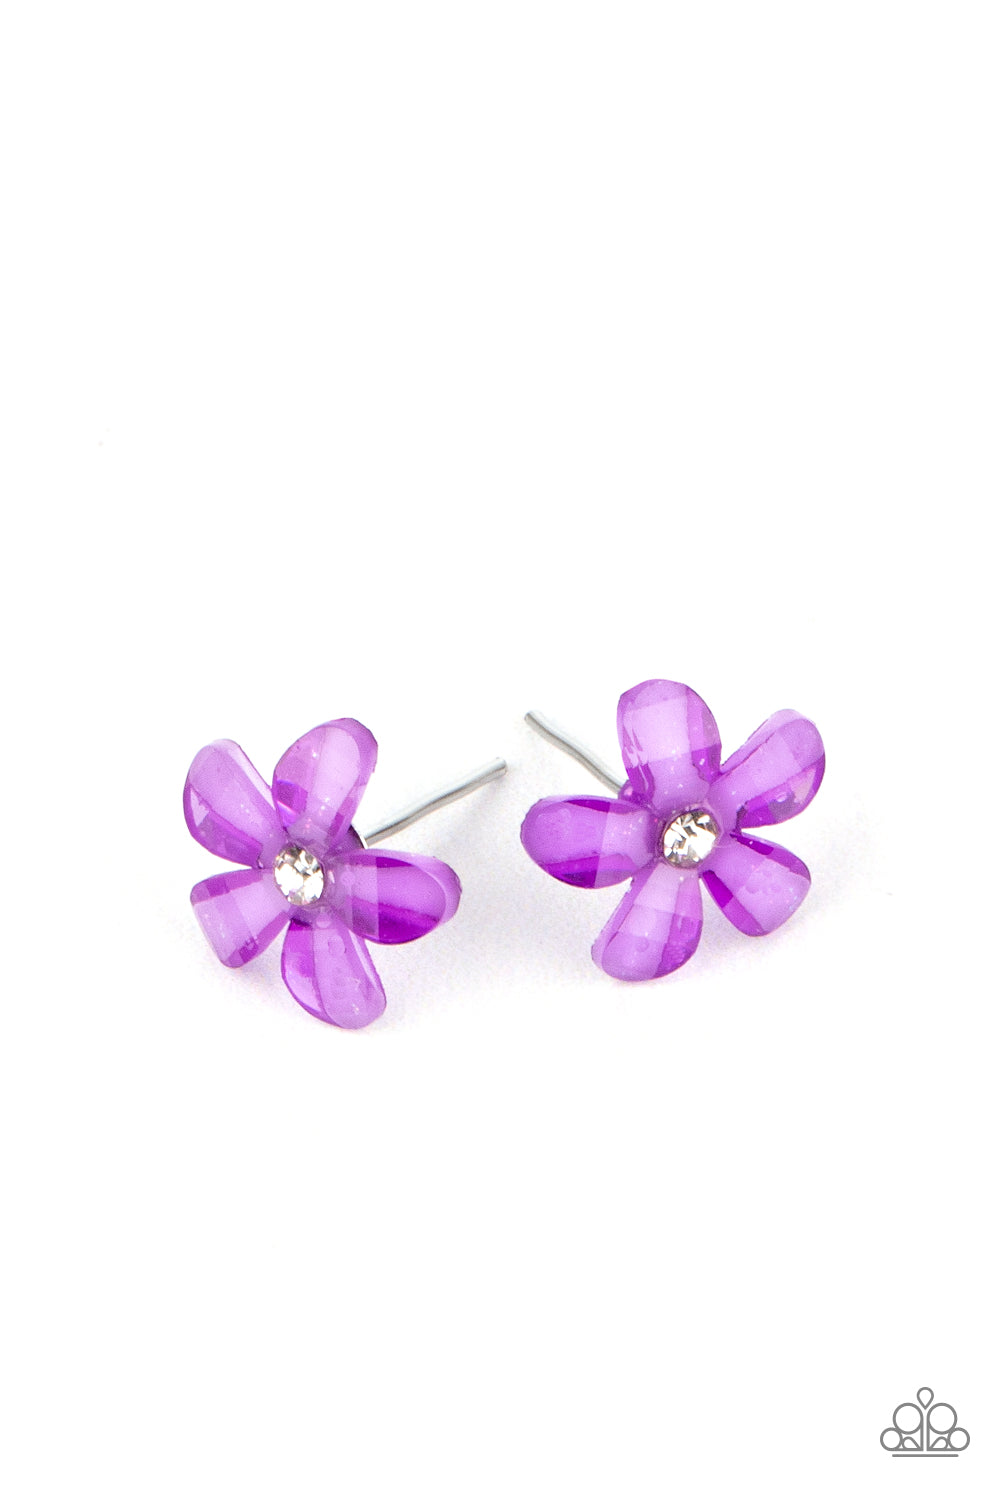 Earrings in assorted colors and floral shapes. Dotted with dainty white rhinestone centers, the glassy floral frames vary in shades of yellow, orange, blue, white, and purple. Earrings attach to standard post fittings.